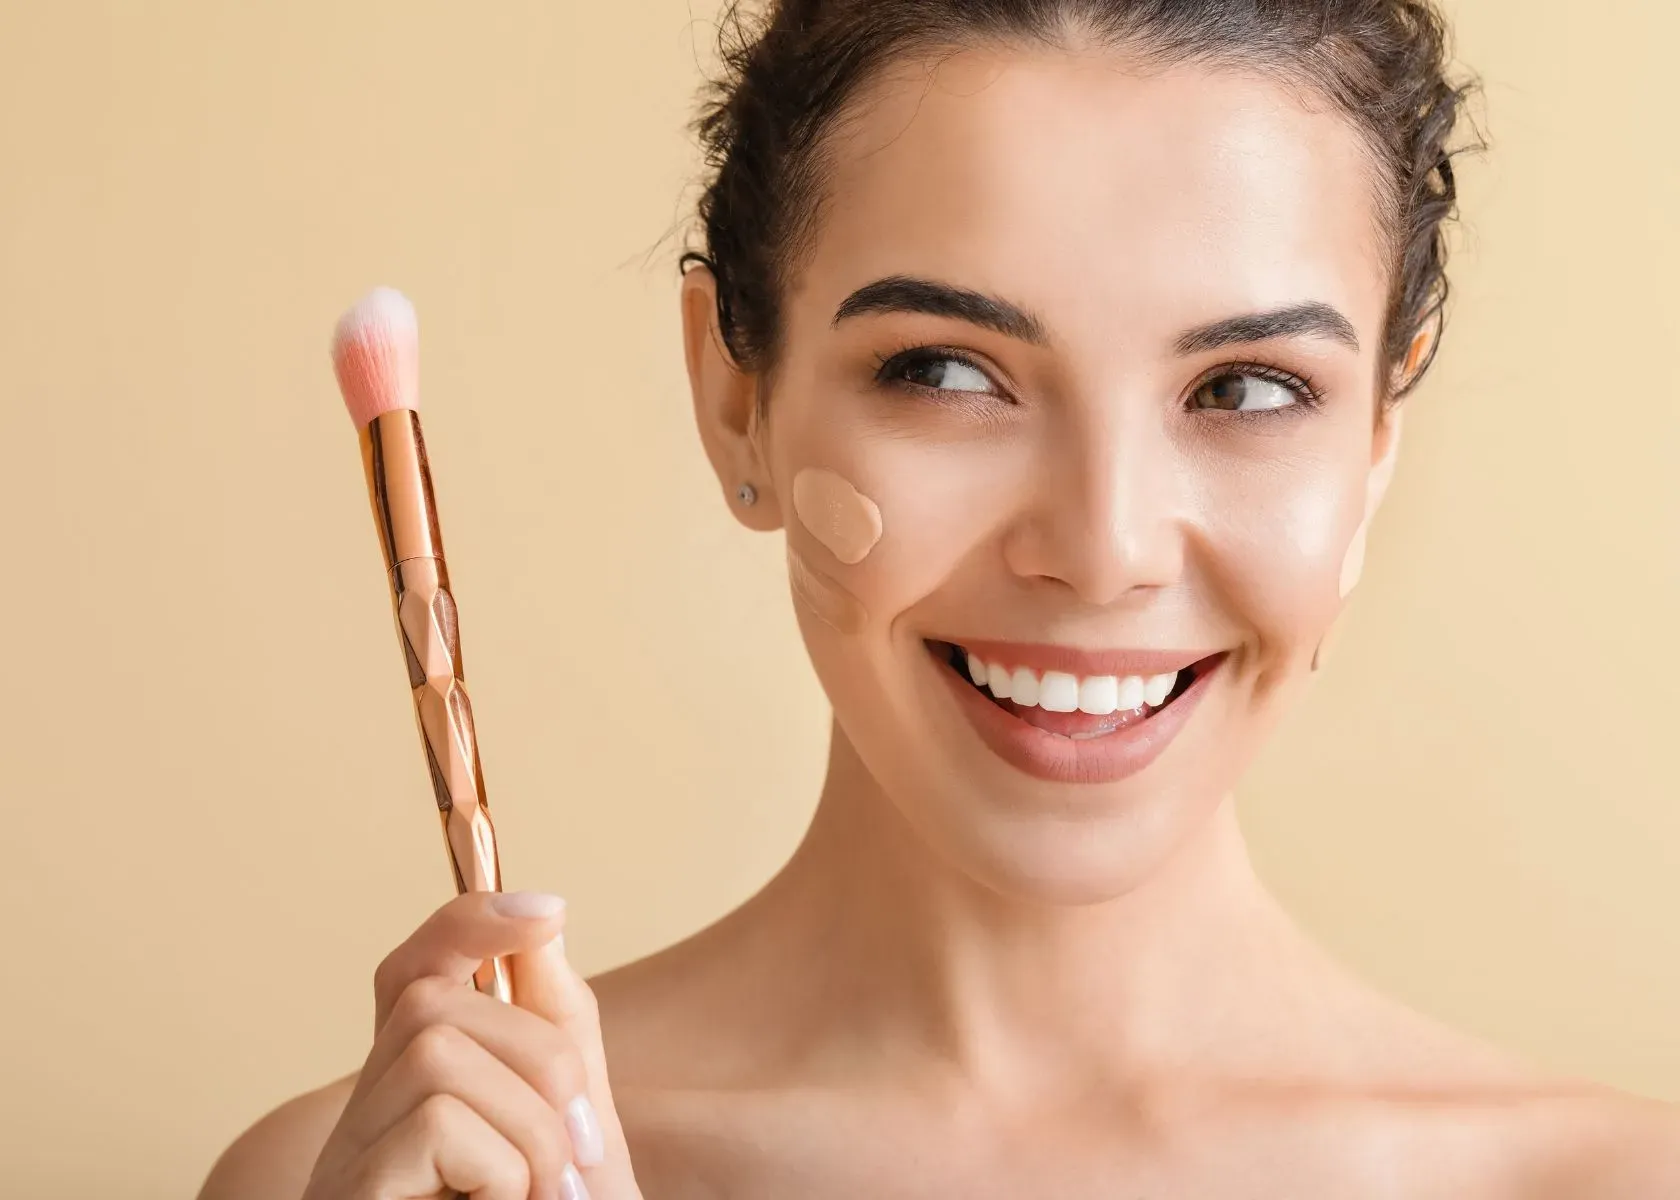 How to Use Water-Based Foundation on Combination Skin